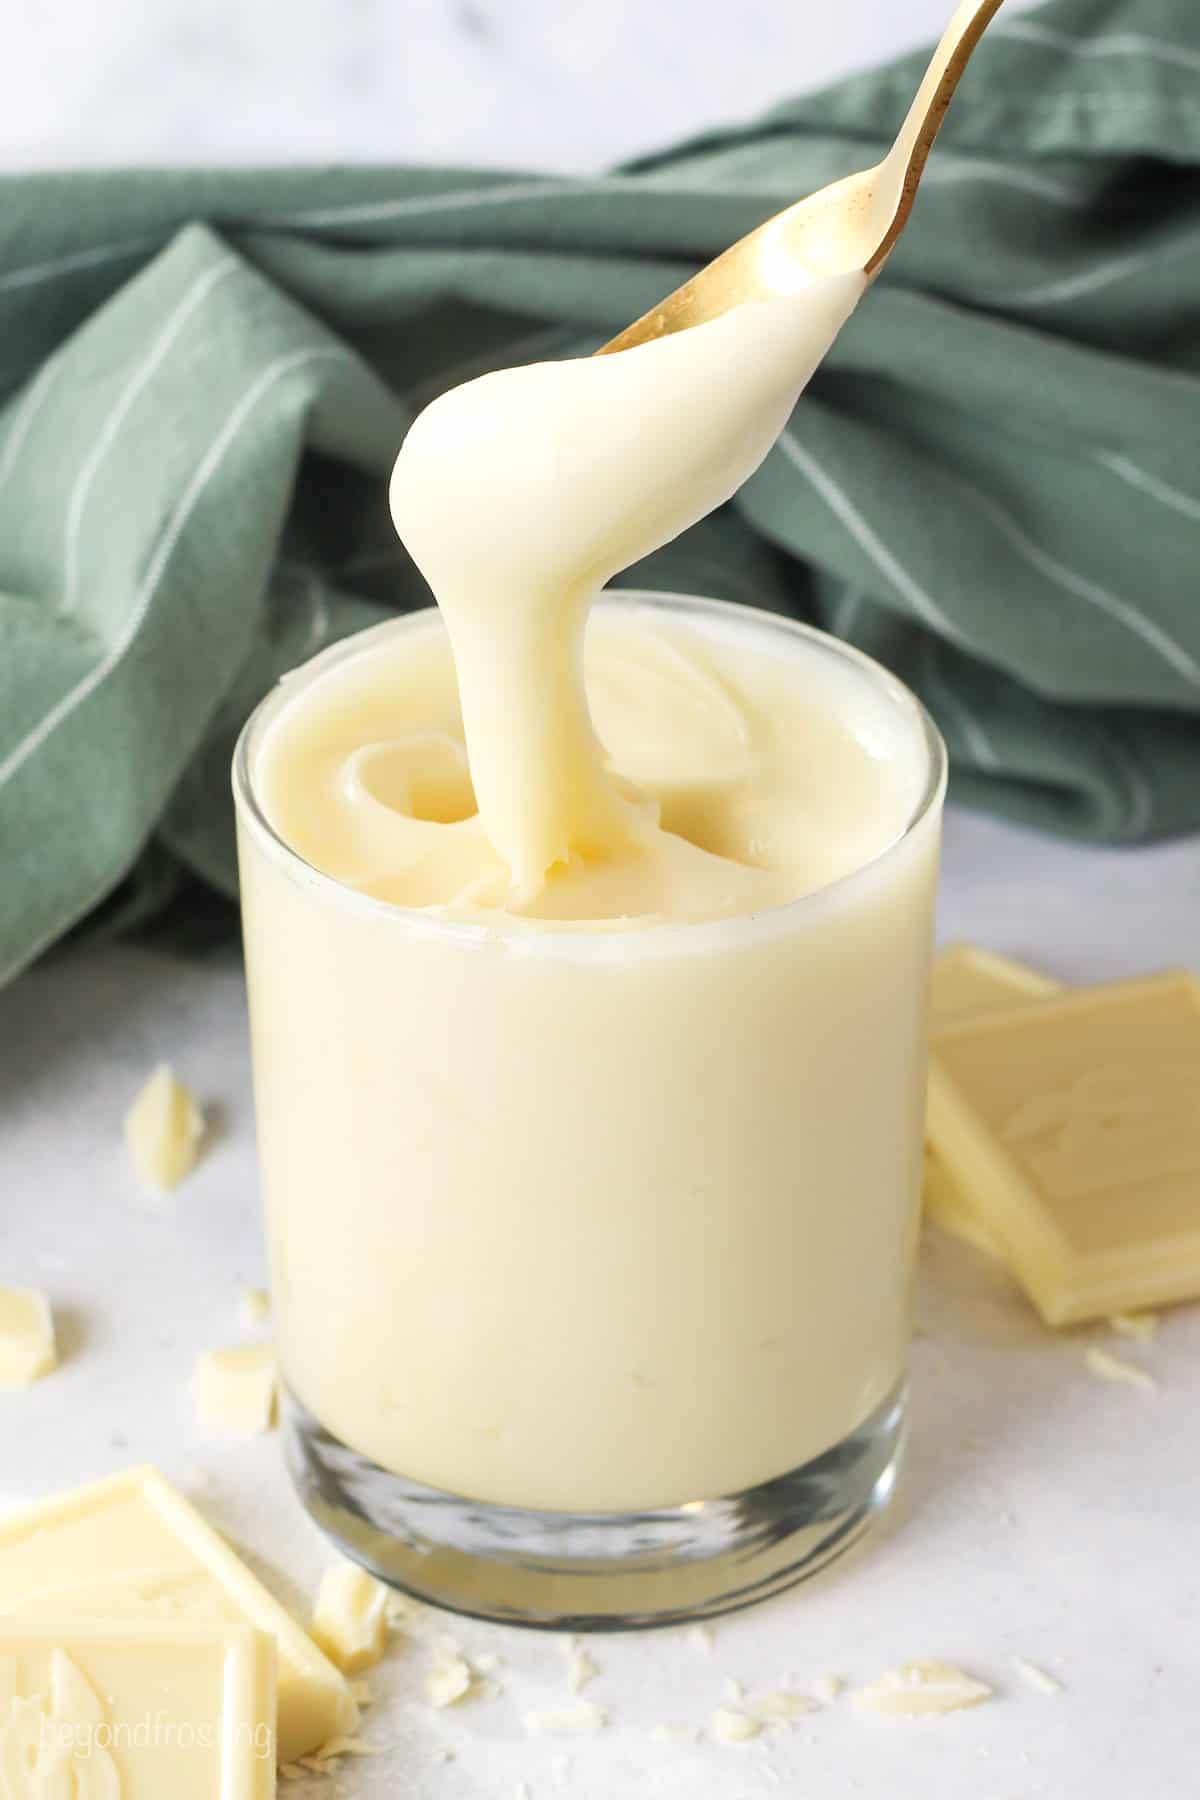 A spoon dipped into a glass of white chocolate ganache, next to scattered white chocolate pieces.